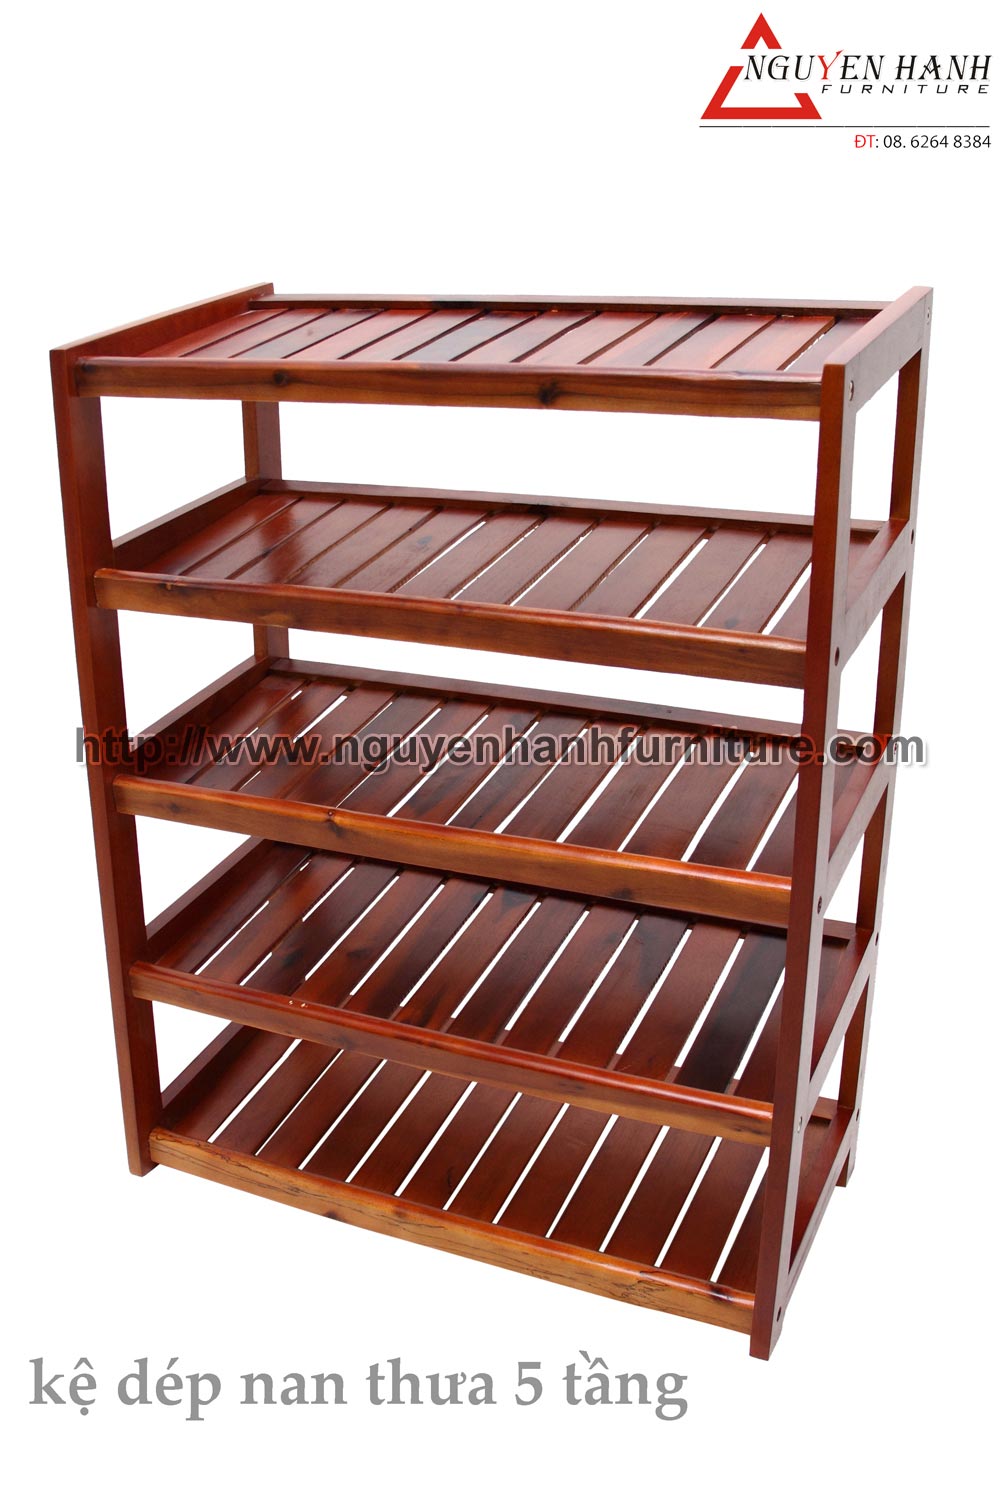 Name product: 5 storey Shoeshelf with sparse blades (red)- Dimensions: 62 x 30 x 82 (H) - Description: Wood natural rubber